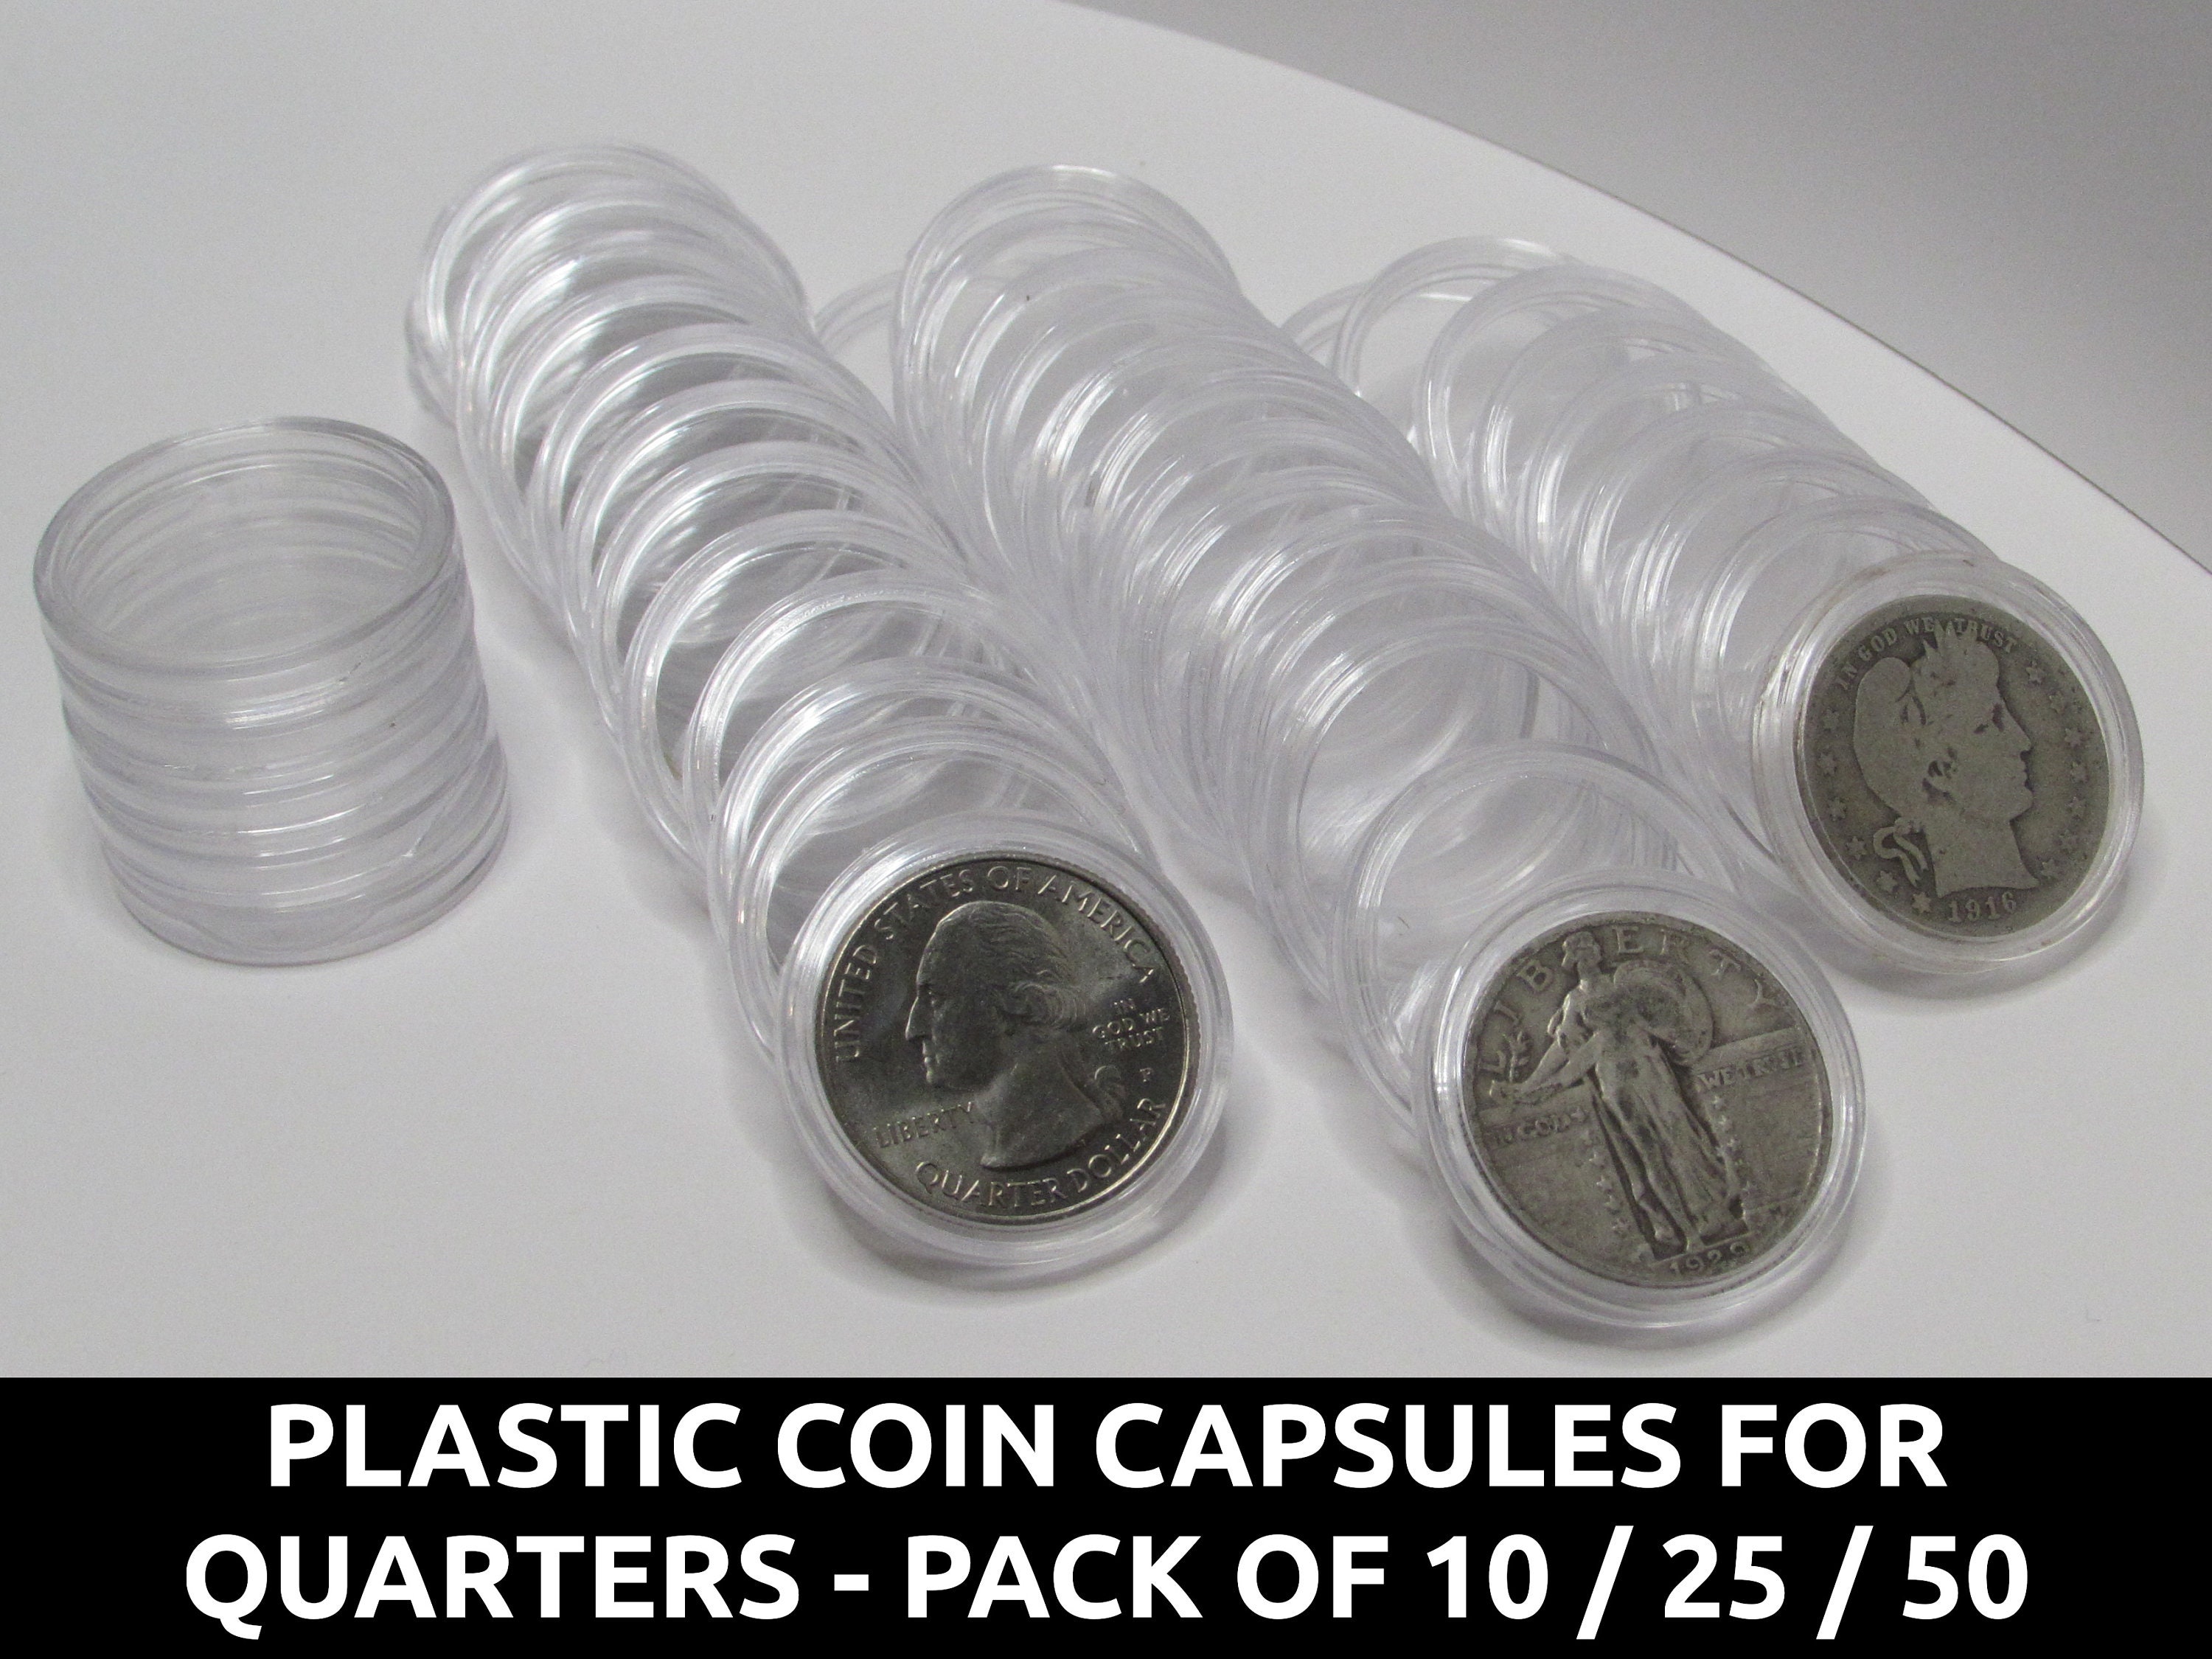 Bangcool 50 Pcs Coin Holders, Acrylic Coin Capsules, Transparent Coin Collection Case, Mini Coin Container, 1.6 Inches Round Coin Storage Box, Coin Collection